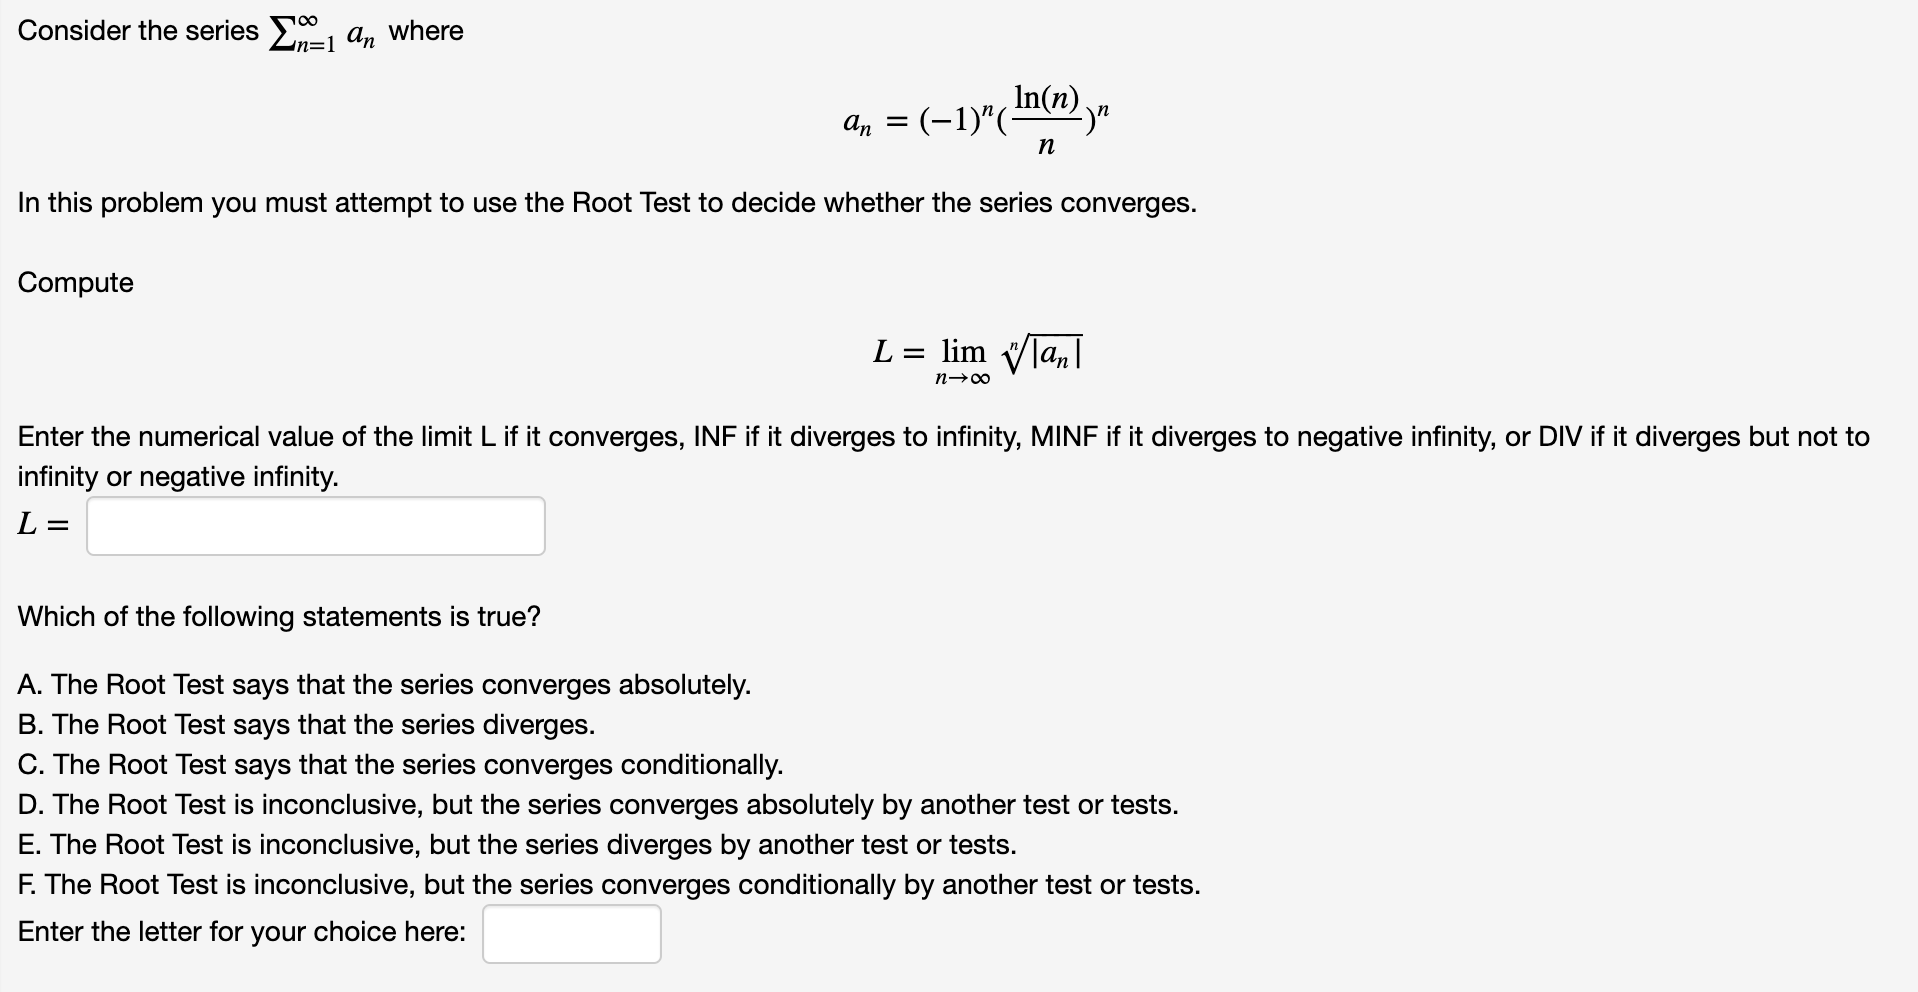 Consider the series , a,, where
In(n)
a, = (-1)"(mn) y"
n
In this problem you must attempt to use the Root Test to decide whether the series converges.
Compute
L = lim Vlan|
n→00
Enter the numerical value of the limit L if it converges, INF if it diverges to infinity, MINF if it diverges to negative infinity, or DIV if it diverges but not to
infinity or negative infinity.
L =
Which of the following statements is true?
A. The Root Test says that the series converges absolutely.
B. The Root Test says that the series diverges.
C. The Root Test says that the series converges conditionally.
D. The Root Test is inconclusive, but the series converges absolutely by another test or tests.
E. The Root Test is inconclusive, but the series diverges by another test or tests.
F. The Root Test is inconclusive, but the series converges conditionally by another test or tests.
Enter the letter for your choice here:
